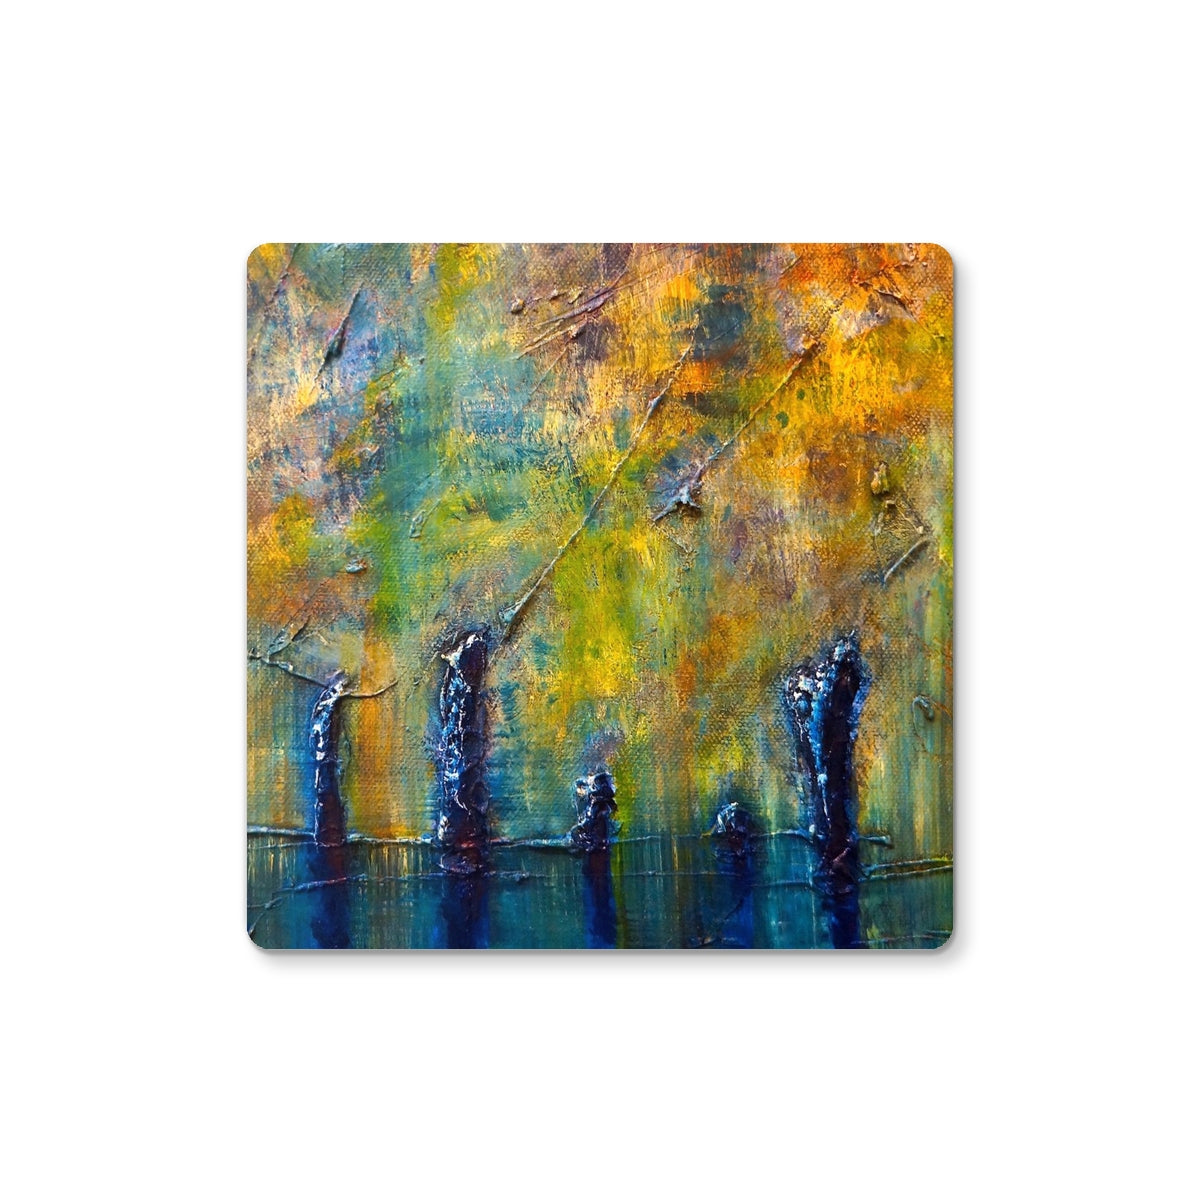 Stenness Moonlight Orkney Art Gifts Coaster-Coasters-Orkney Art Gallery-6 Coasters-Paintings, Prints, Homeware, Art Gifts From Scotland By Scottish Artist Kevin Hunter